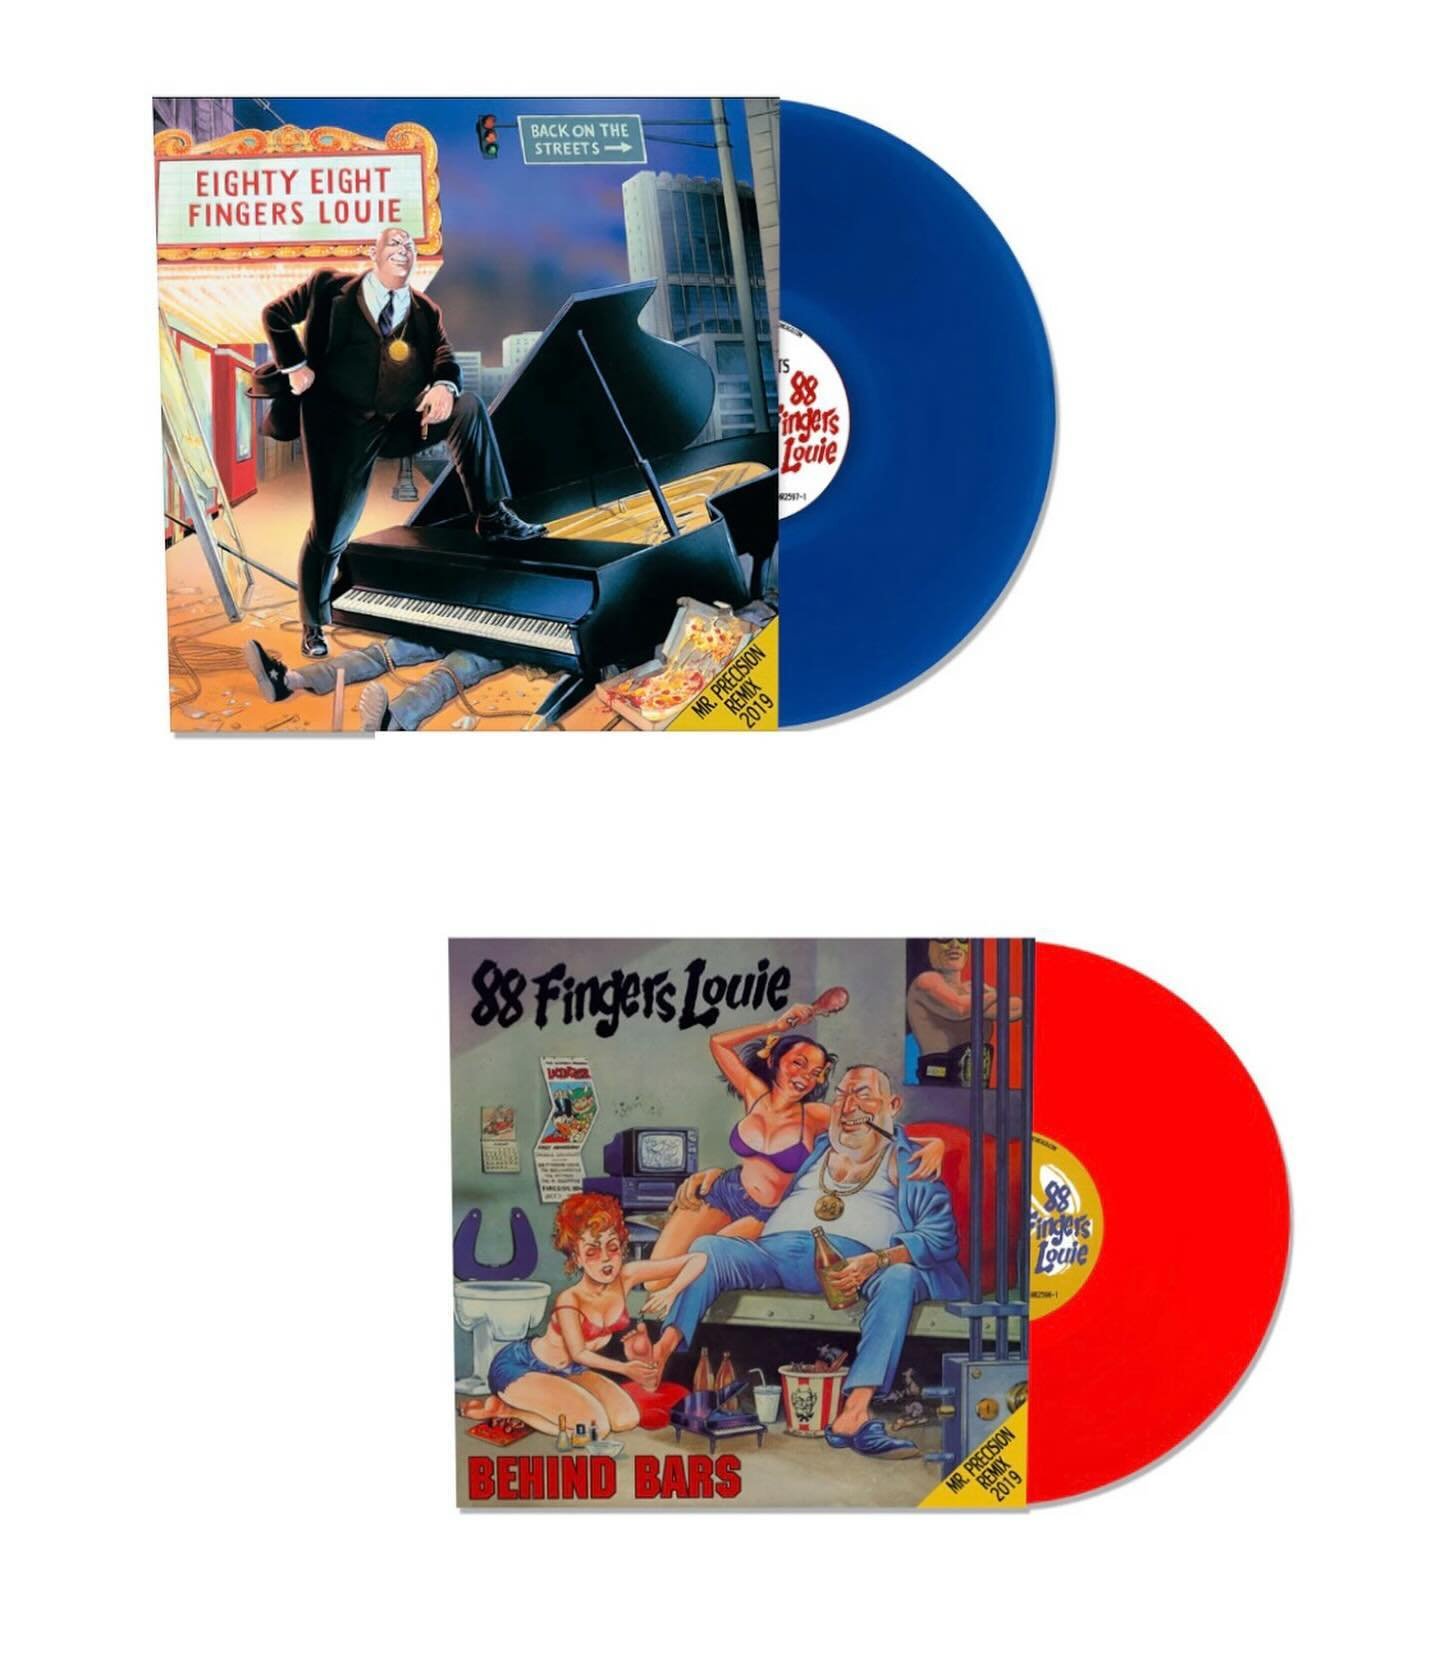 New vinyl alert 👀 88 Fingers Louie classic albums on LP Now - Back On The Streets (Features 100 Proof) &amp; Behind Bars are in stock, and, for the first time EVER on vinyl - 88 Fingers Up Your Ass. LINK IN BIO!